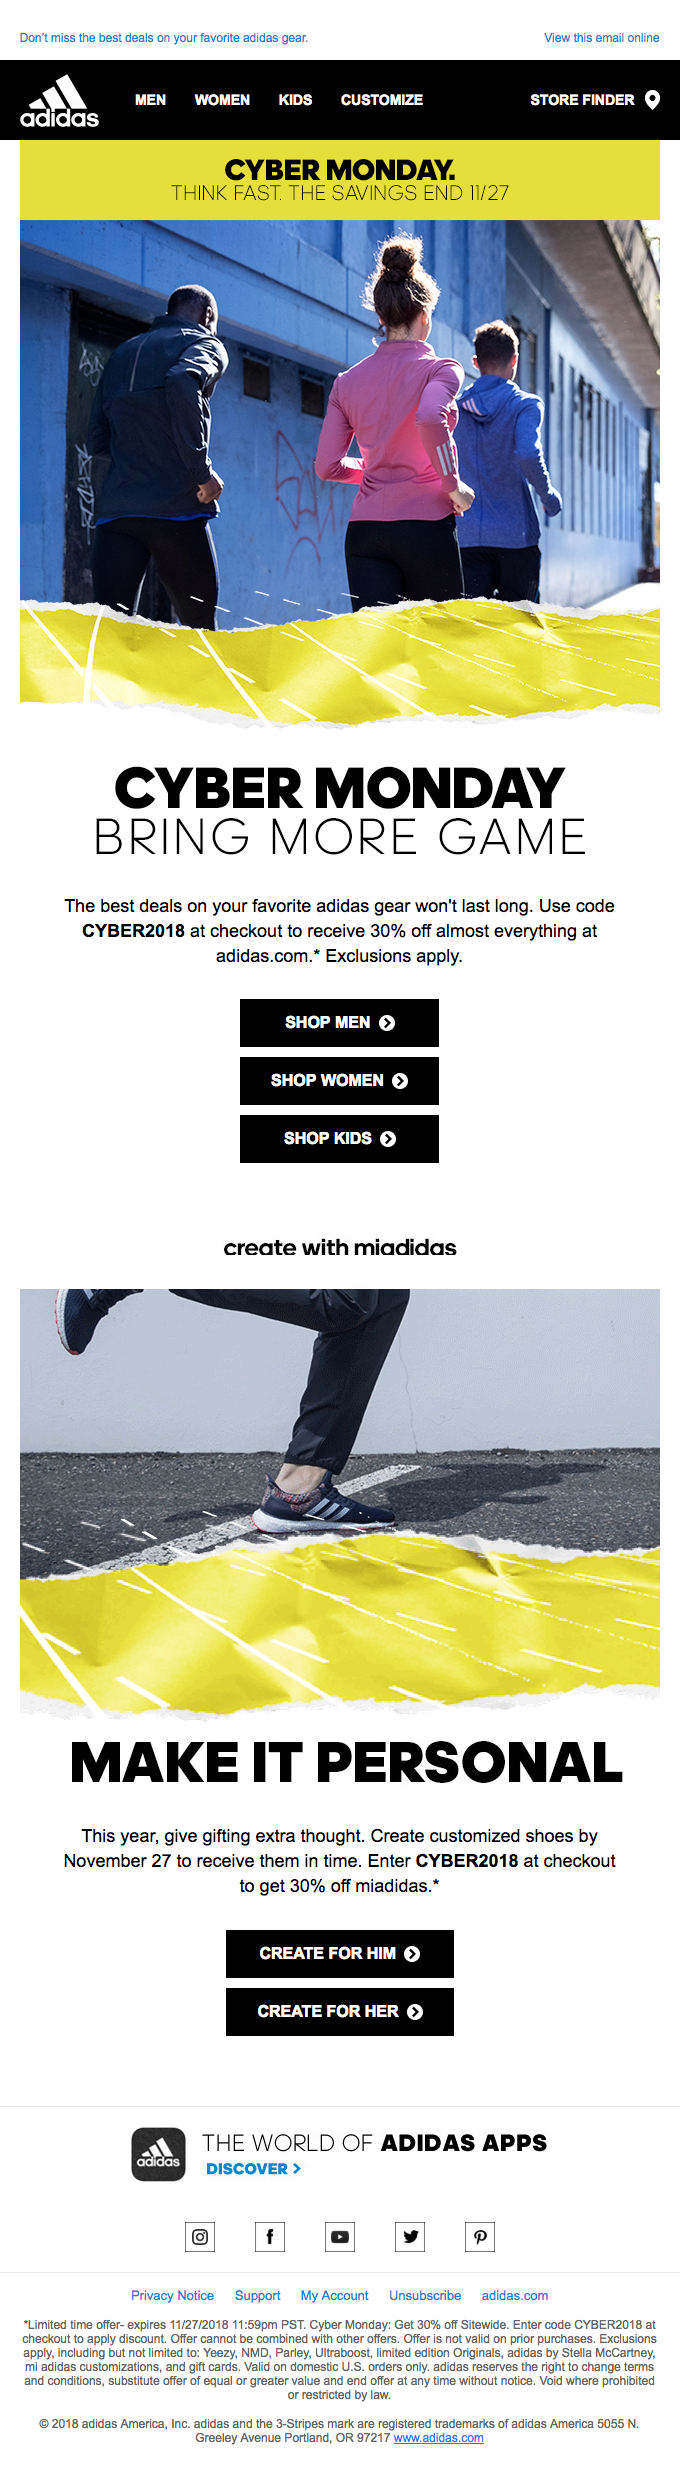 Think fast. Cyber Monday is our biggest sale. - Adidas Email Newsletter